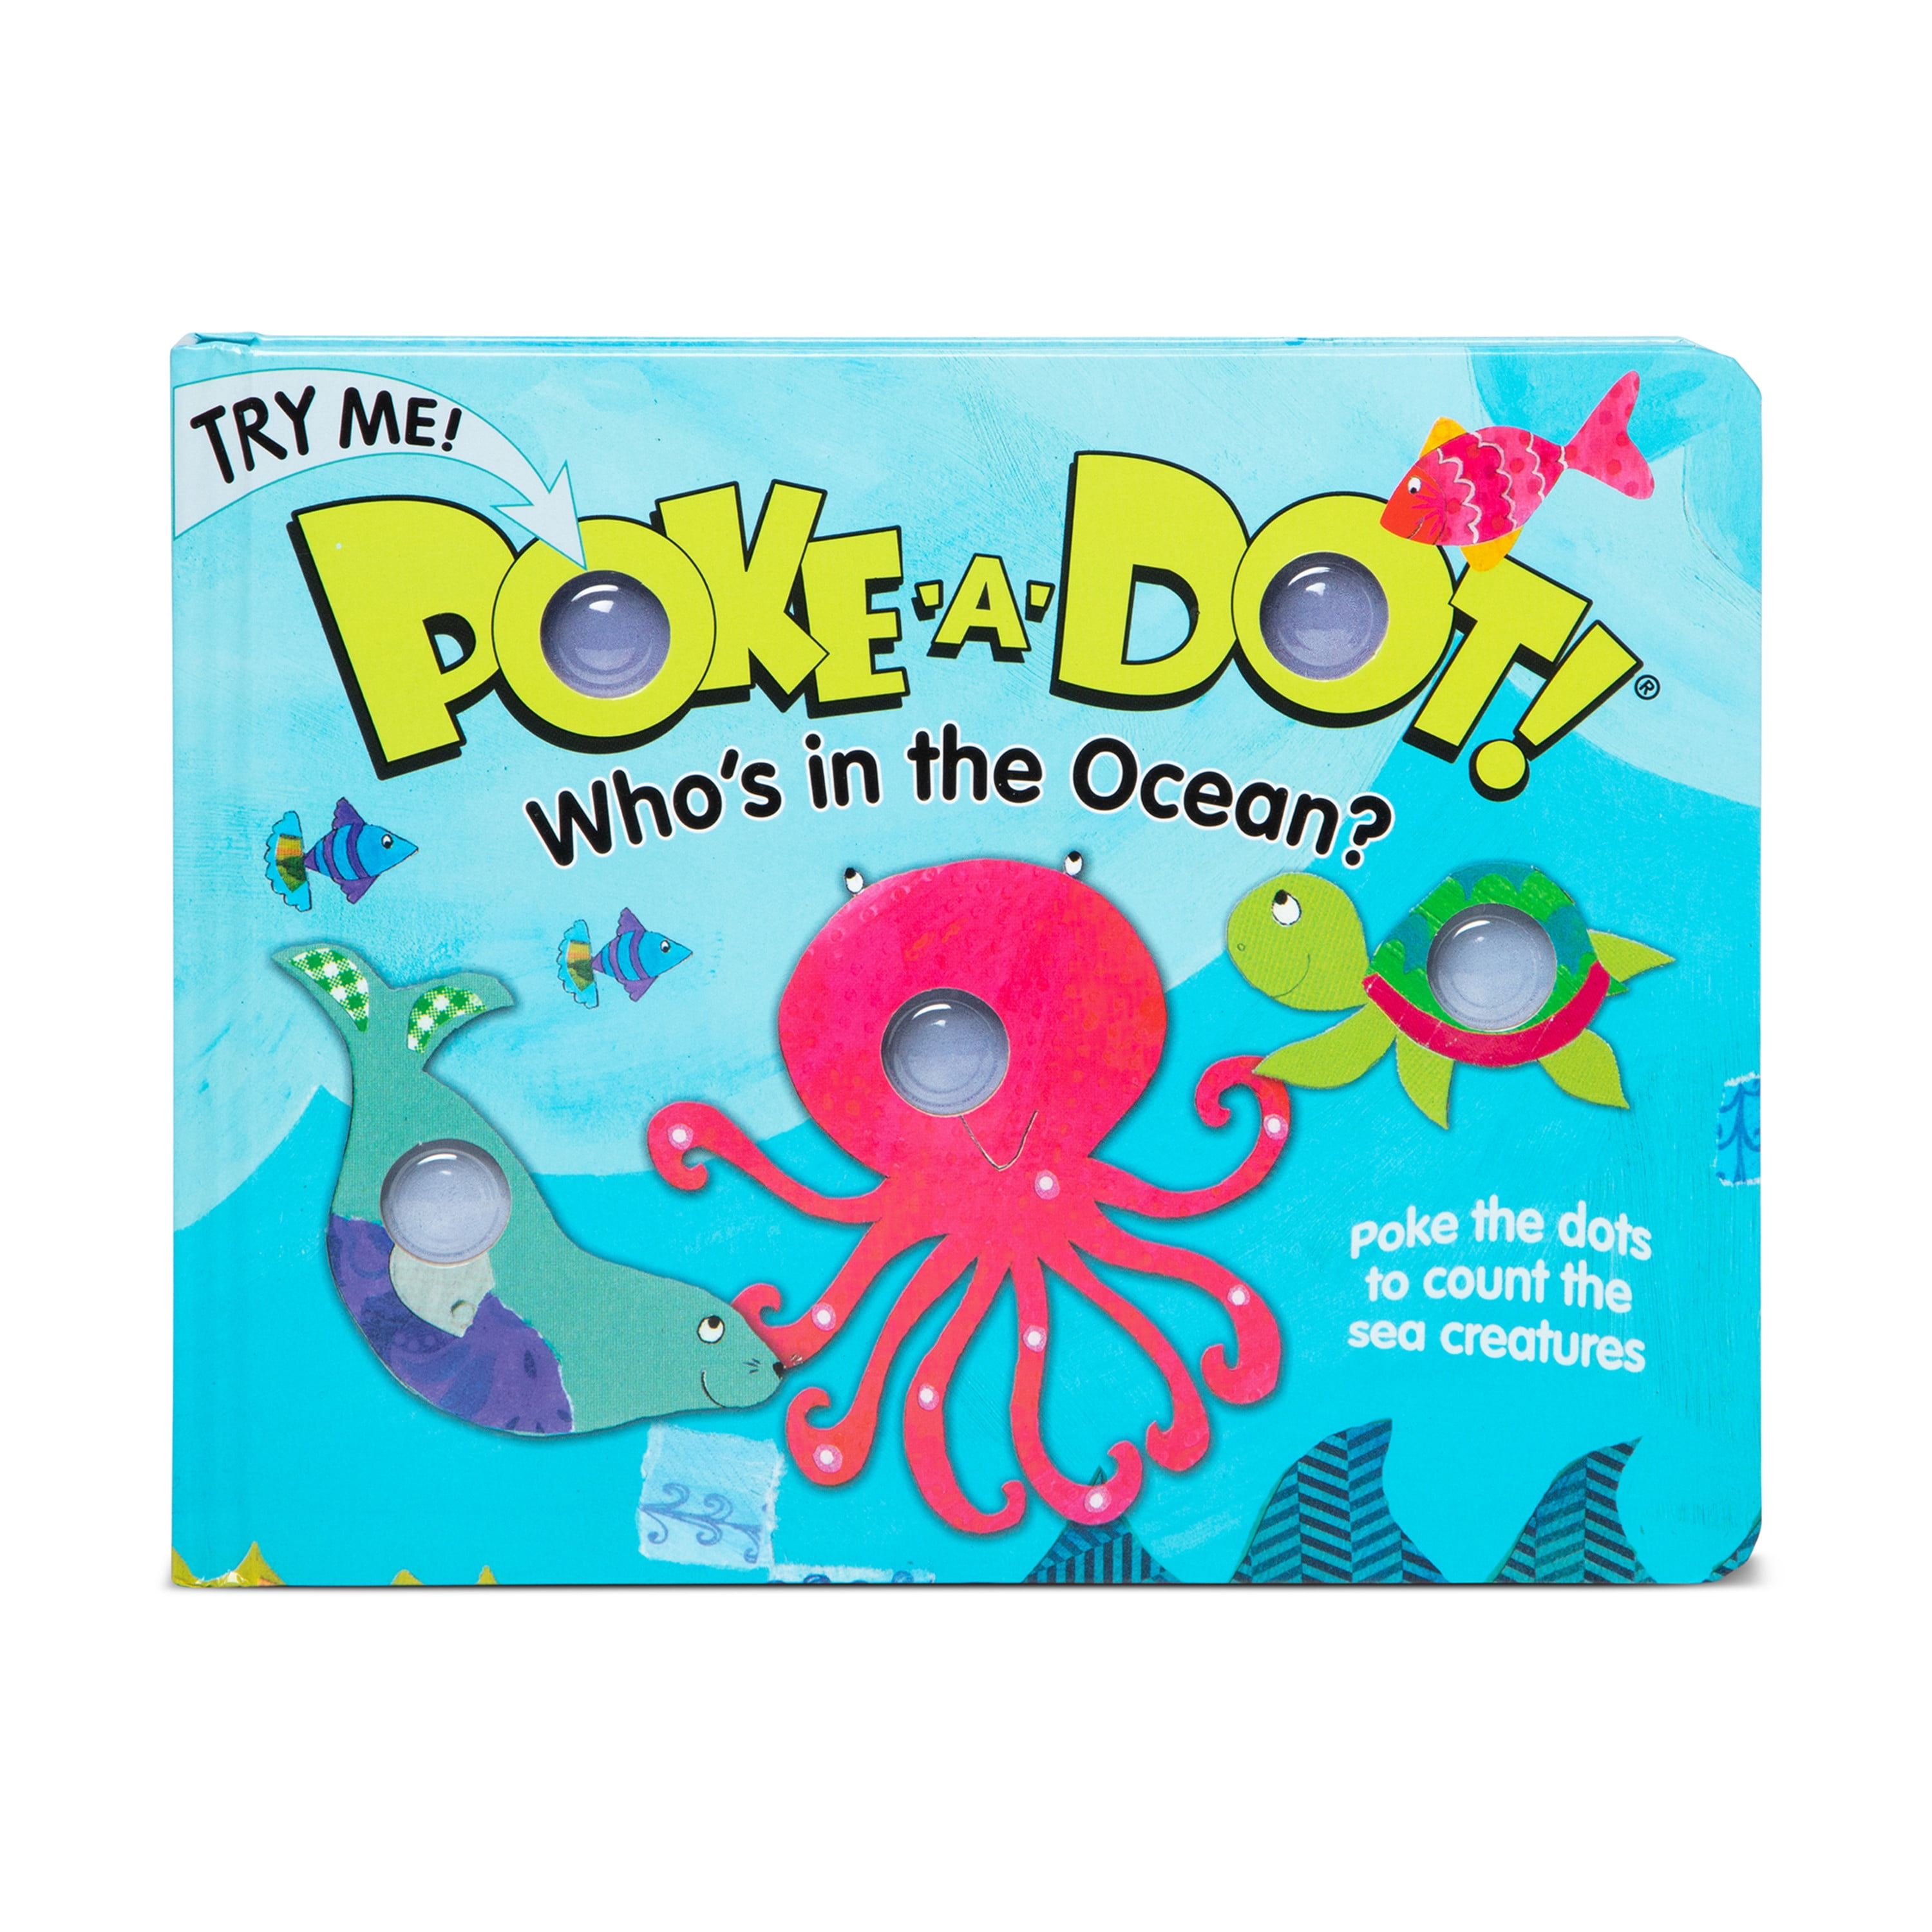 KD's Books - Do you love Poke-a-Dot books? We now have smaller Poke-a-Dot  books designed for the youngest readers! Original Poke-a-Dots are  available, too. Stop by and add these to your collection!